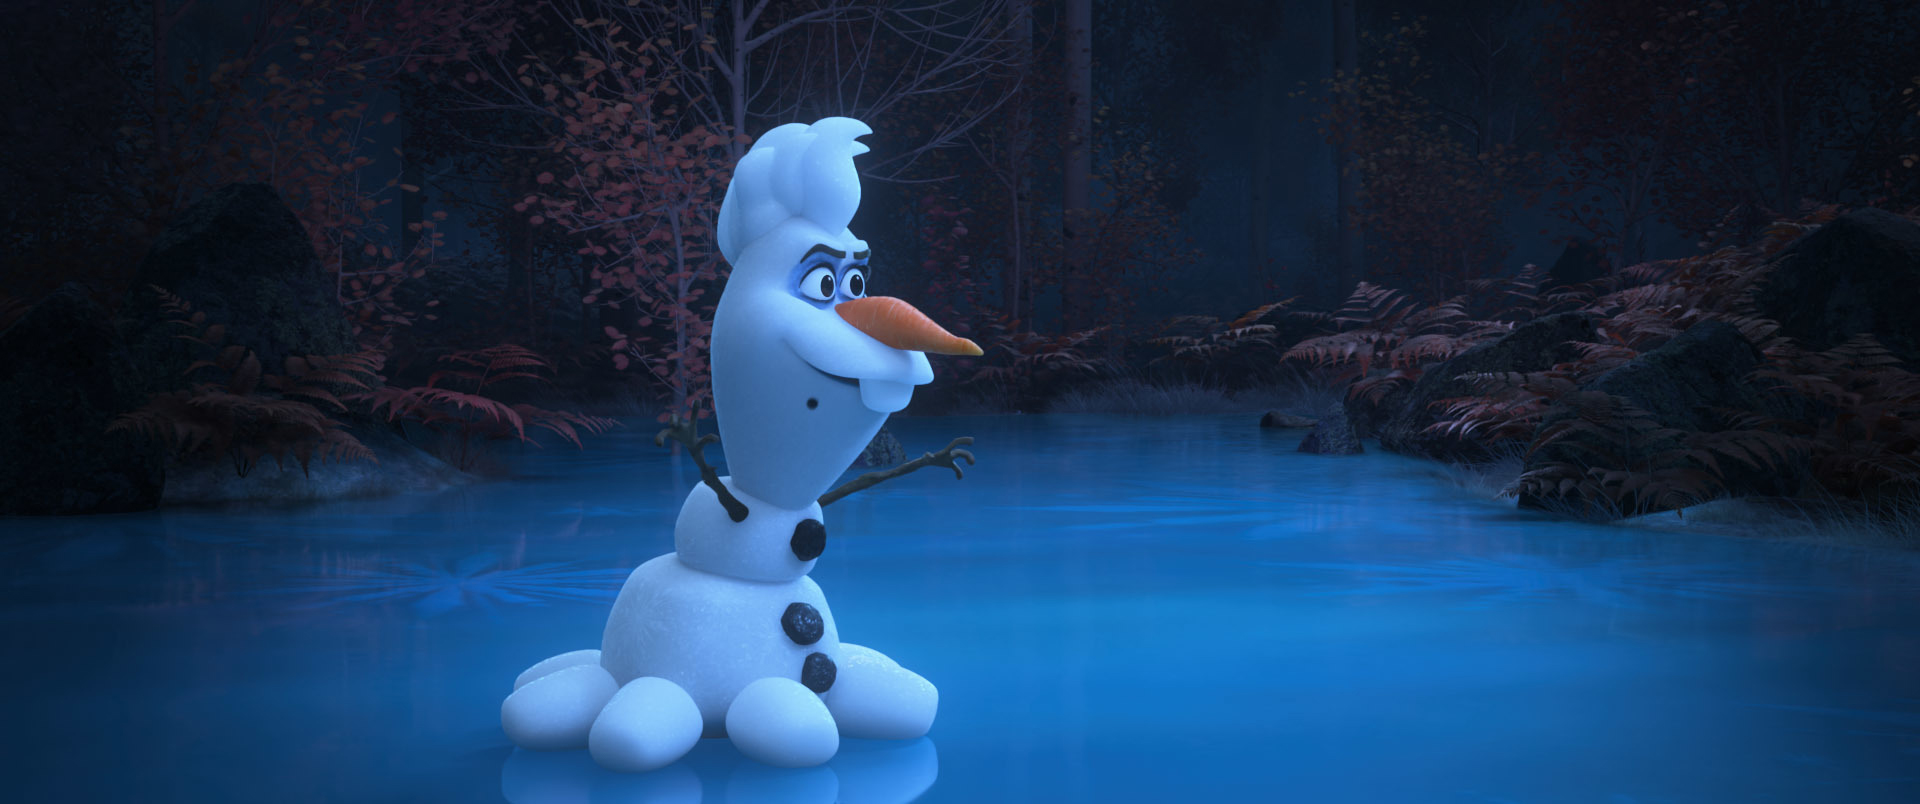 A scene from Olaf Presents at Disney Plus